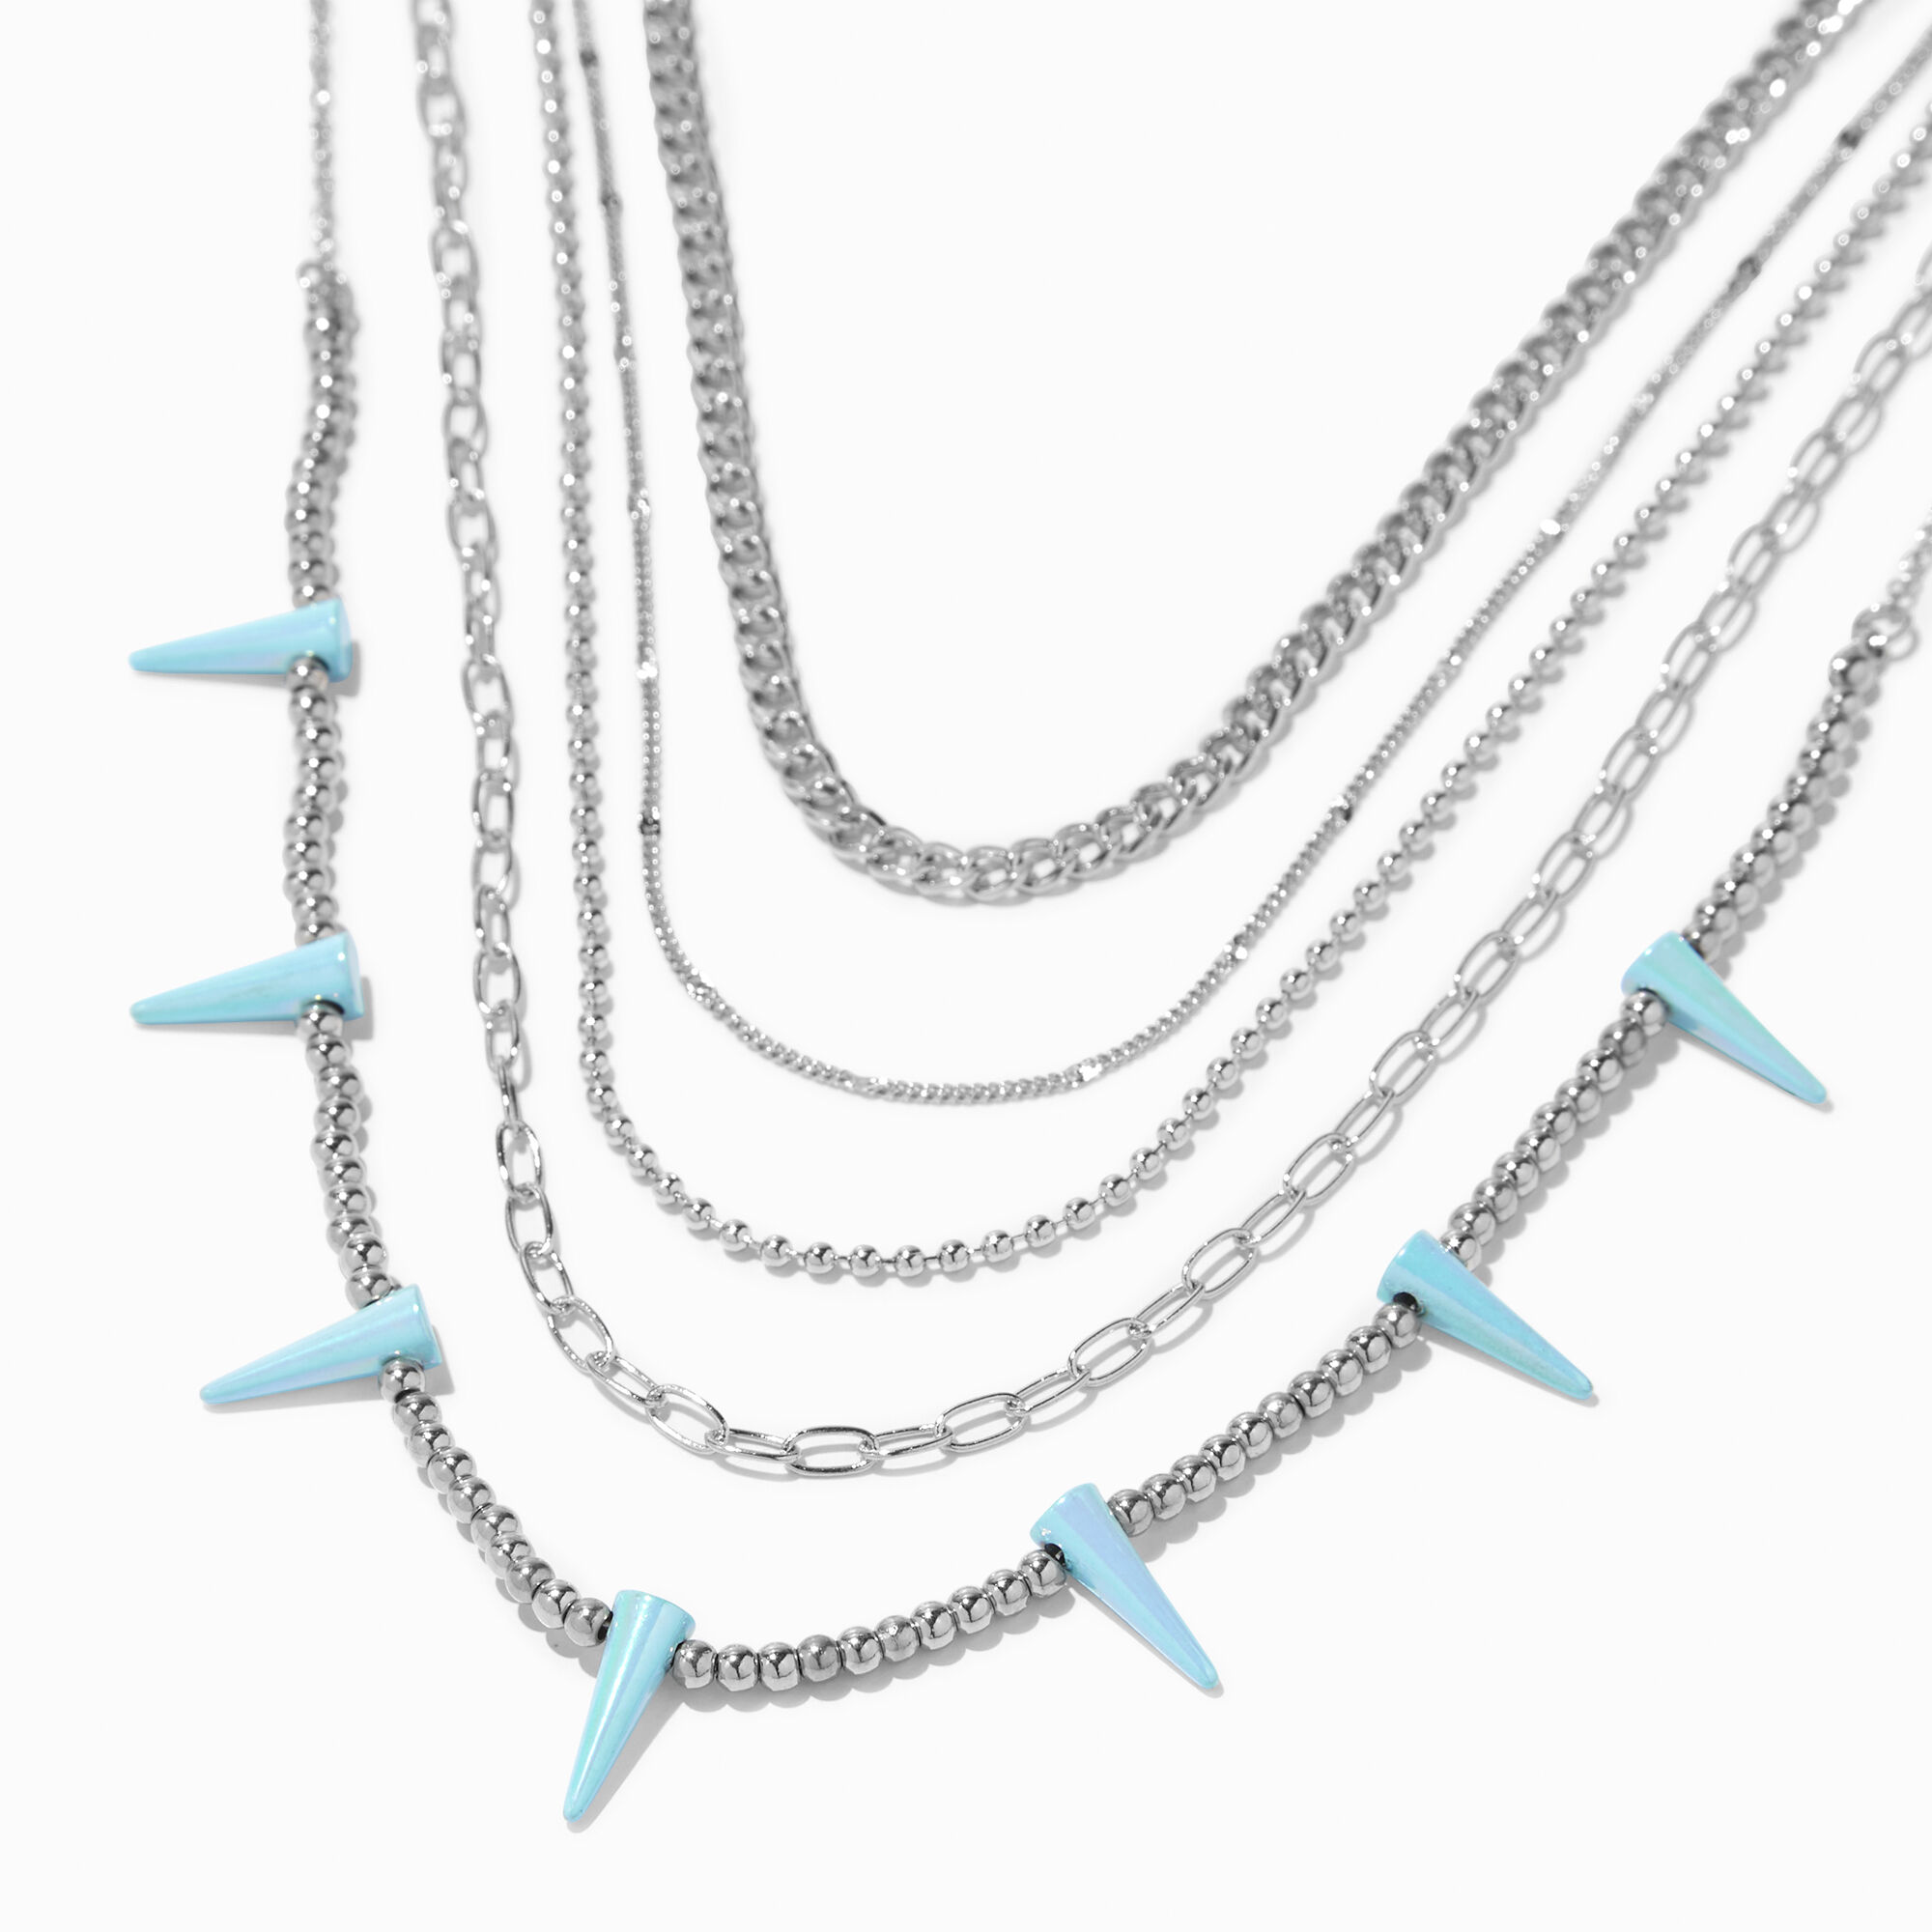 View Claires SilverTone Chain Spikes MultiStrand Necklace Light Blue information